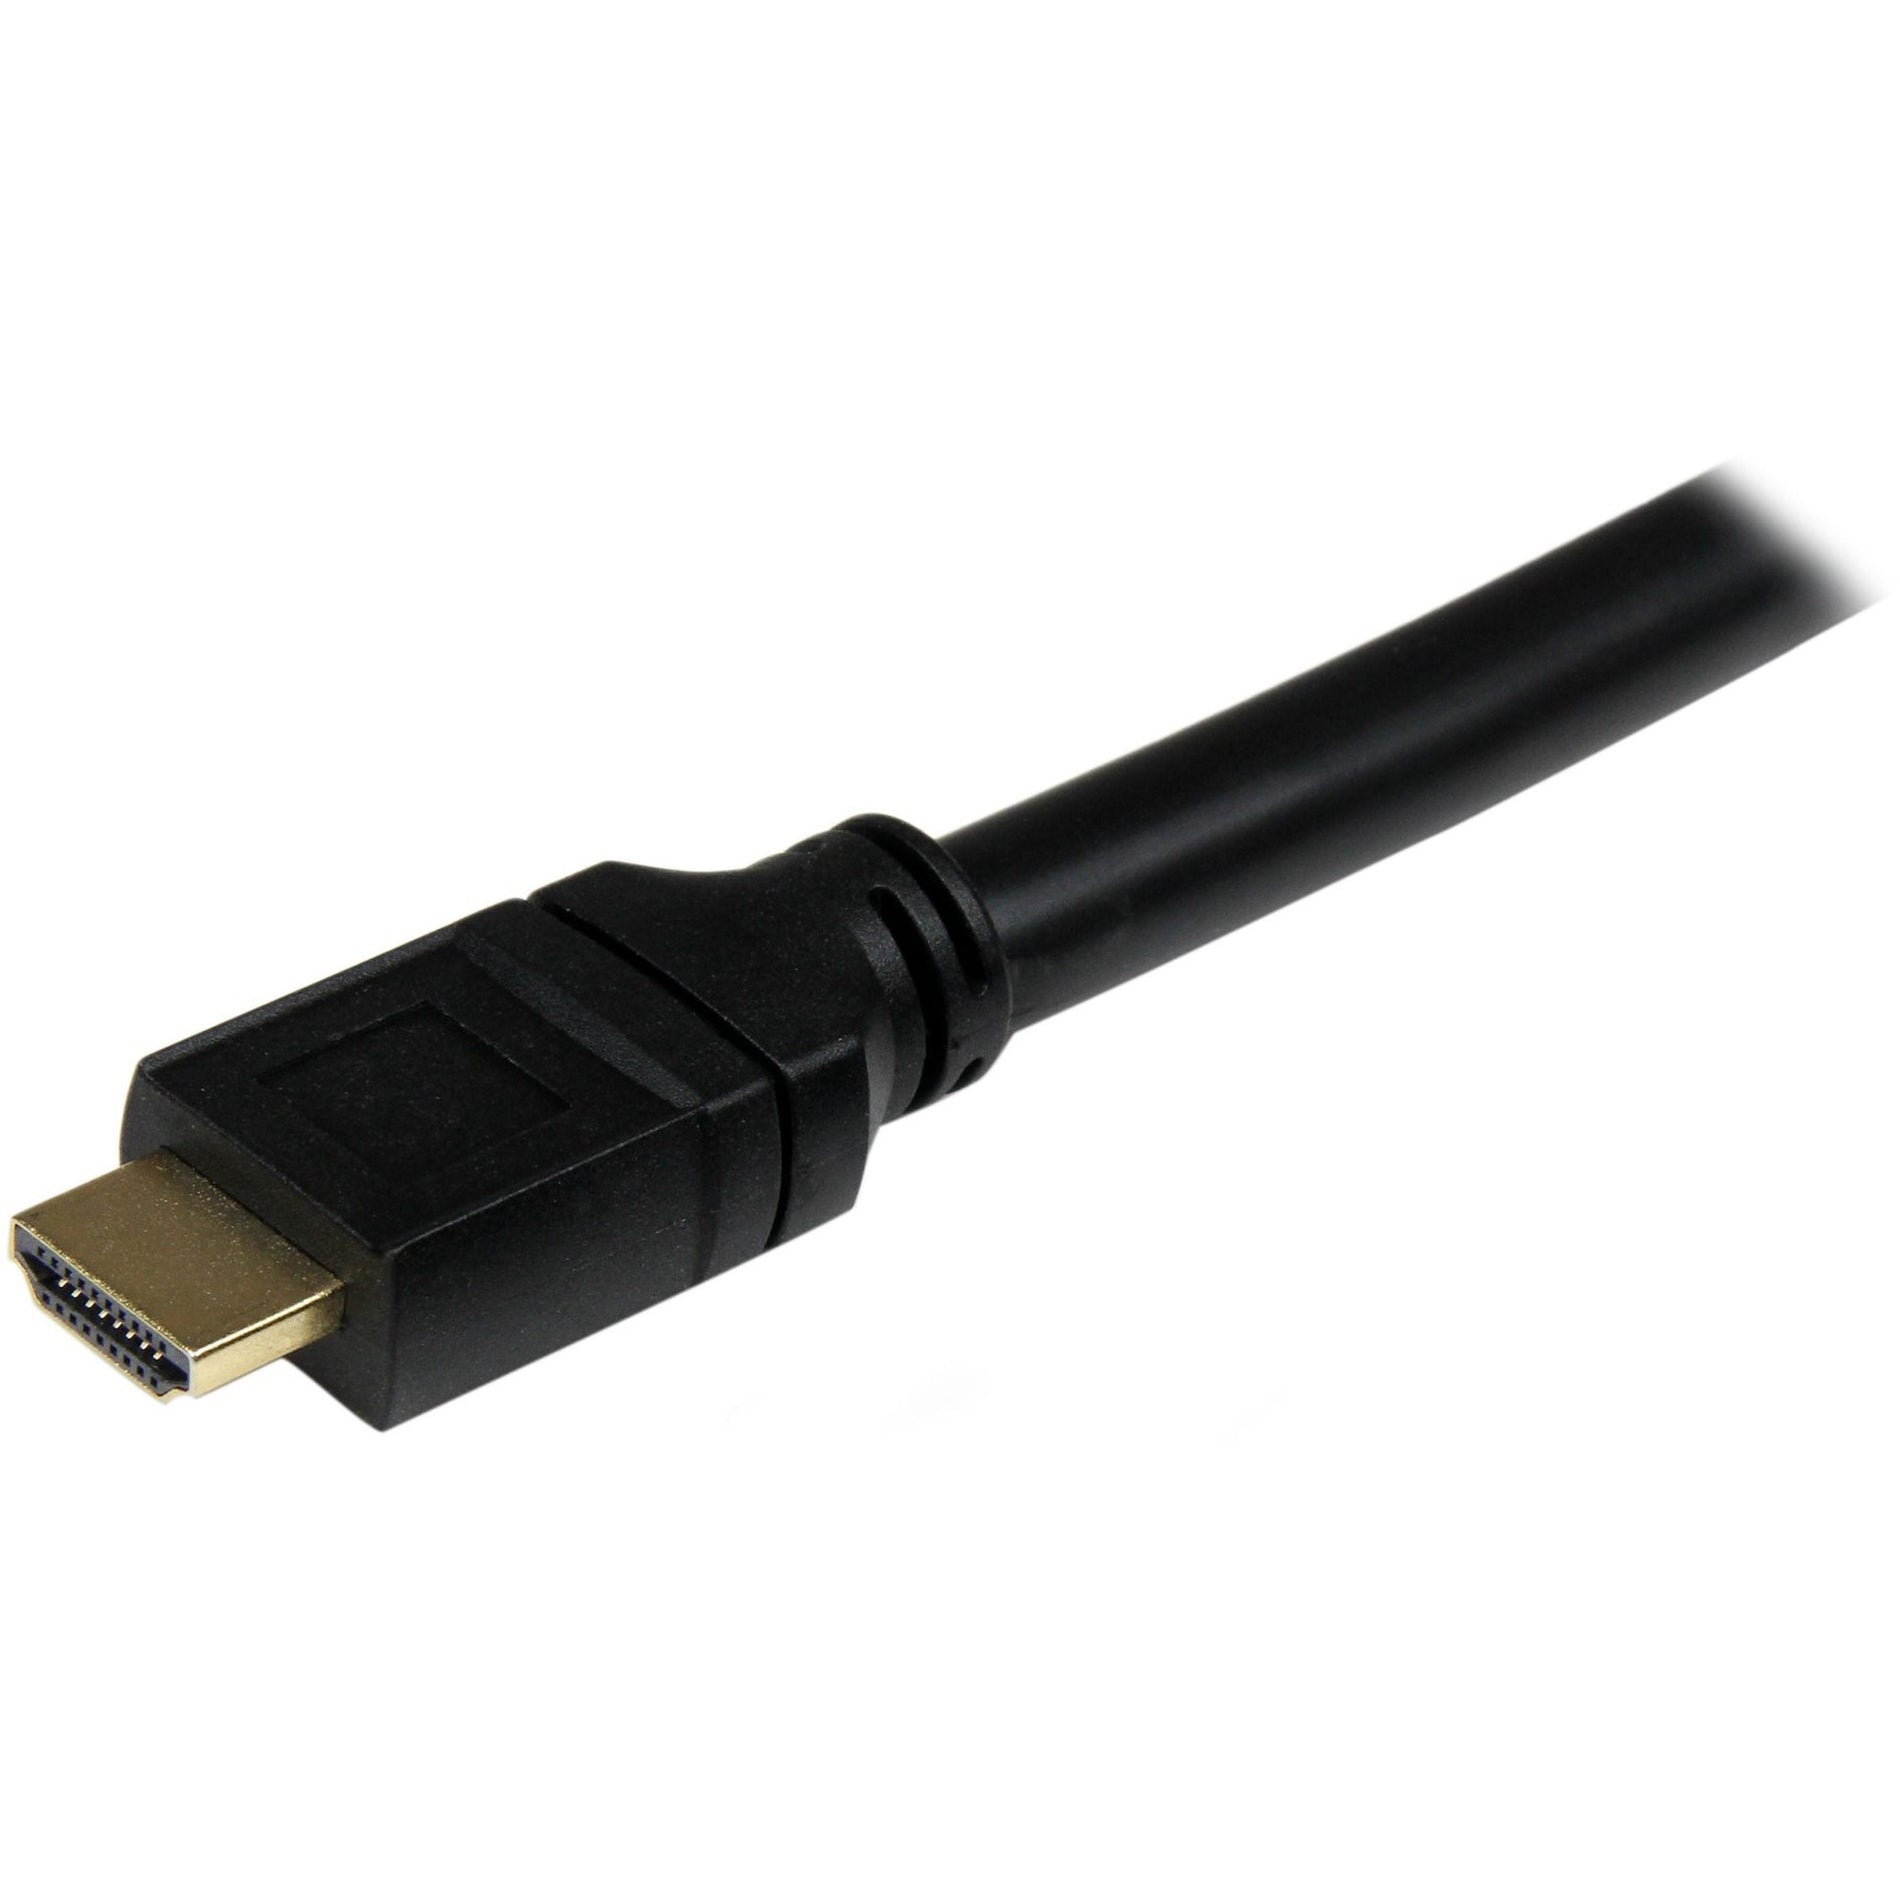 StarTech.com HDPMM25 25 ft 7m Plenum-Rated High Speed HDMI Cable - HDMI to HDMI - M/M, 10.2 Gbit/s Data Transfer Rate, 4096 x 2160 Supported Resolution